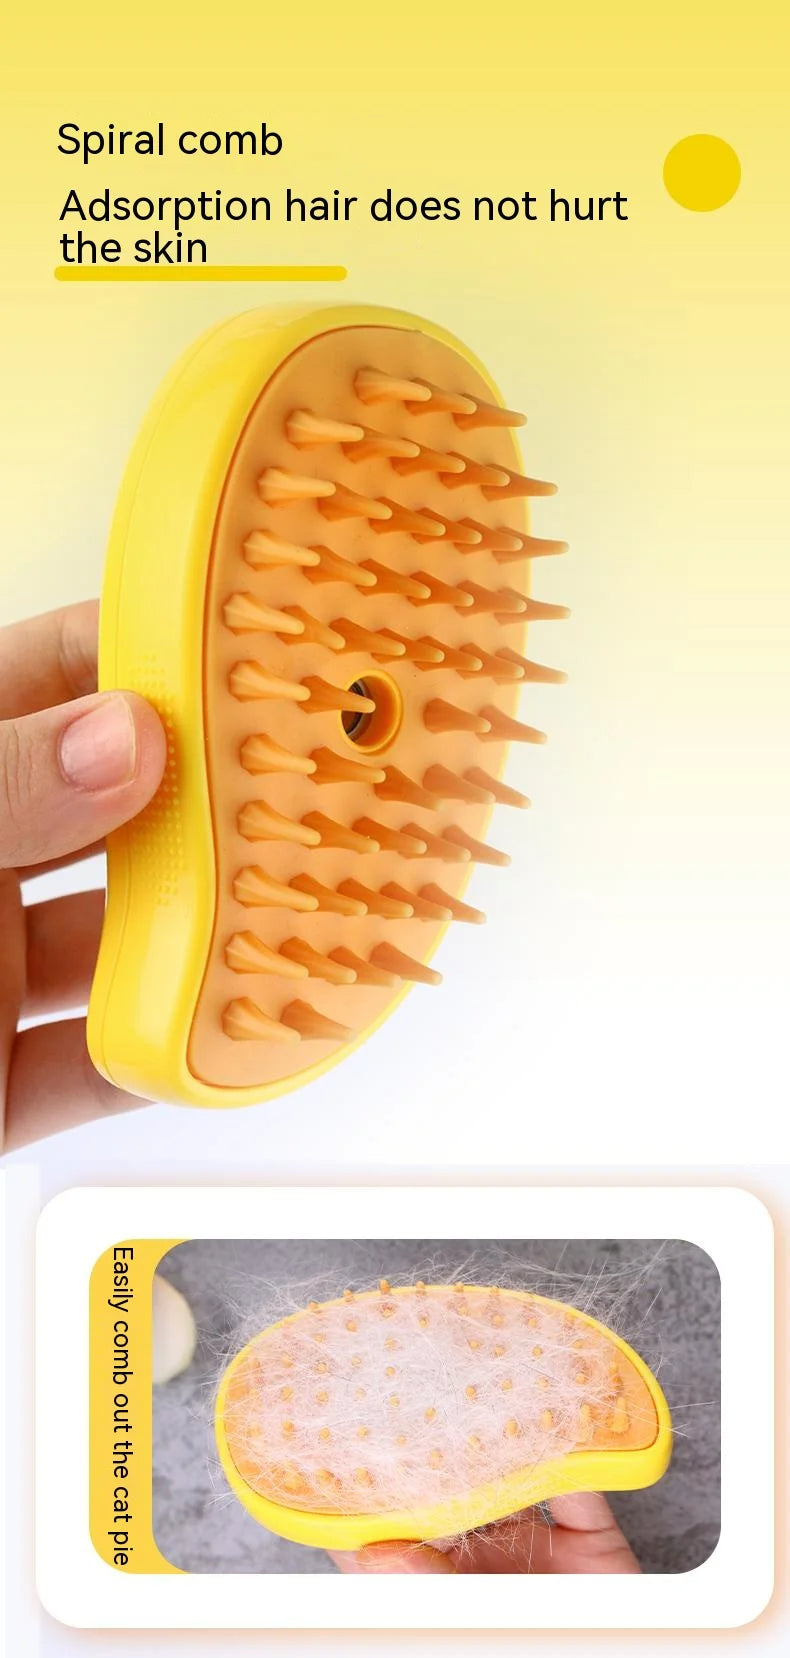 2PCS Steamy Dog Brush Electric Spray Cat Hair Brush 4 in1 Dog Steamer Brush for Massage Pet Grooming Removing Tangled and Loose Hair,, Gift For Pet 84